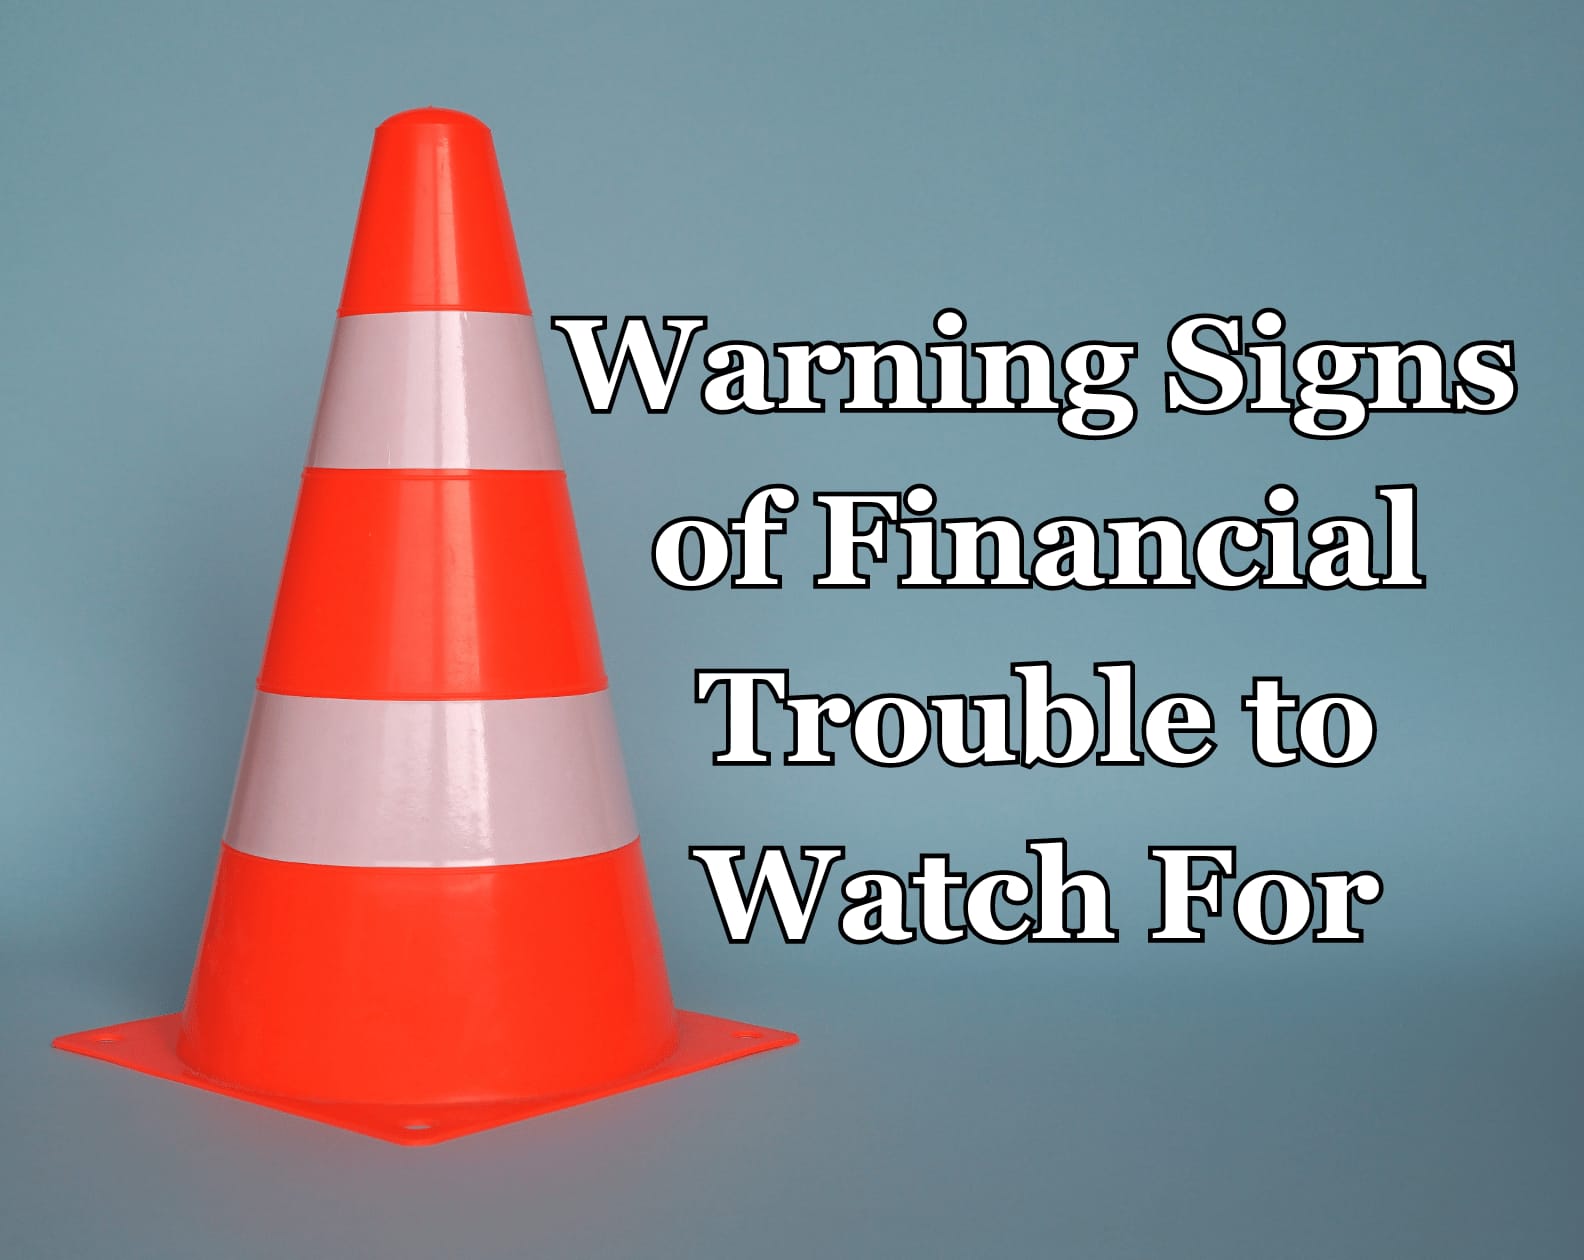 Warning Signs of Financial Trouble to Watch For